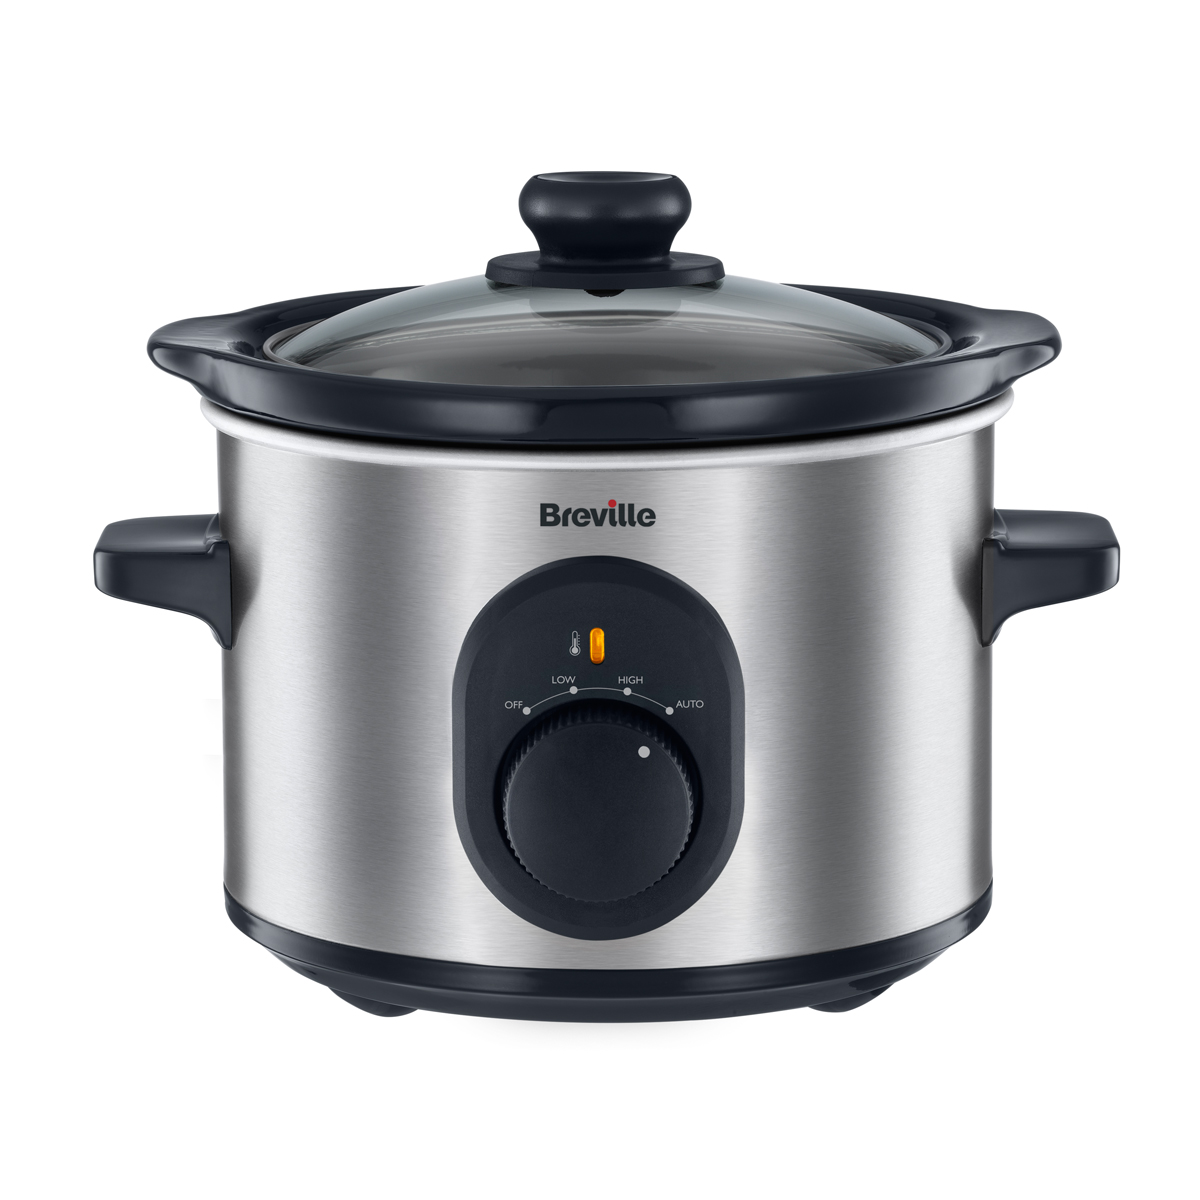 One Person 1.5L Slow Cooker, Stainless Steel - VTP169